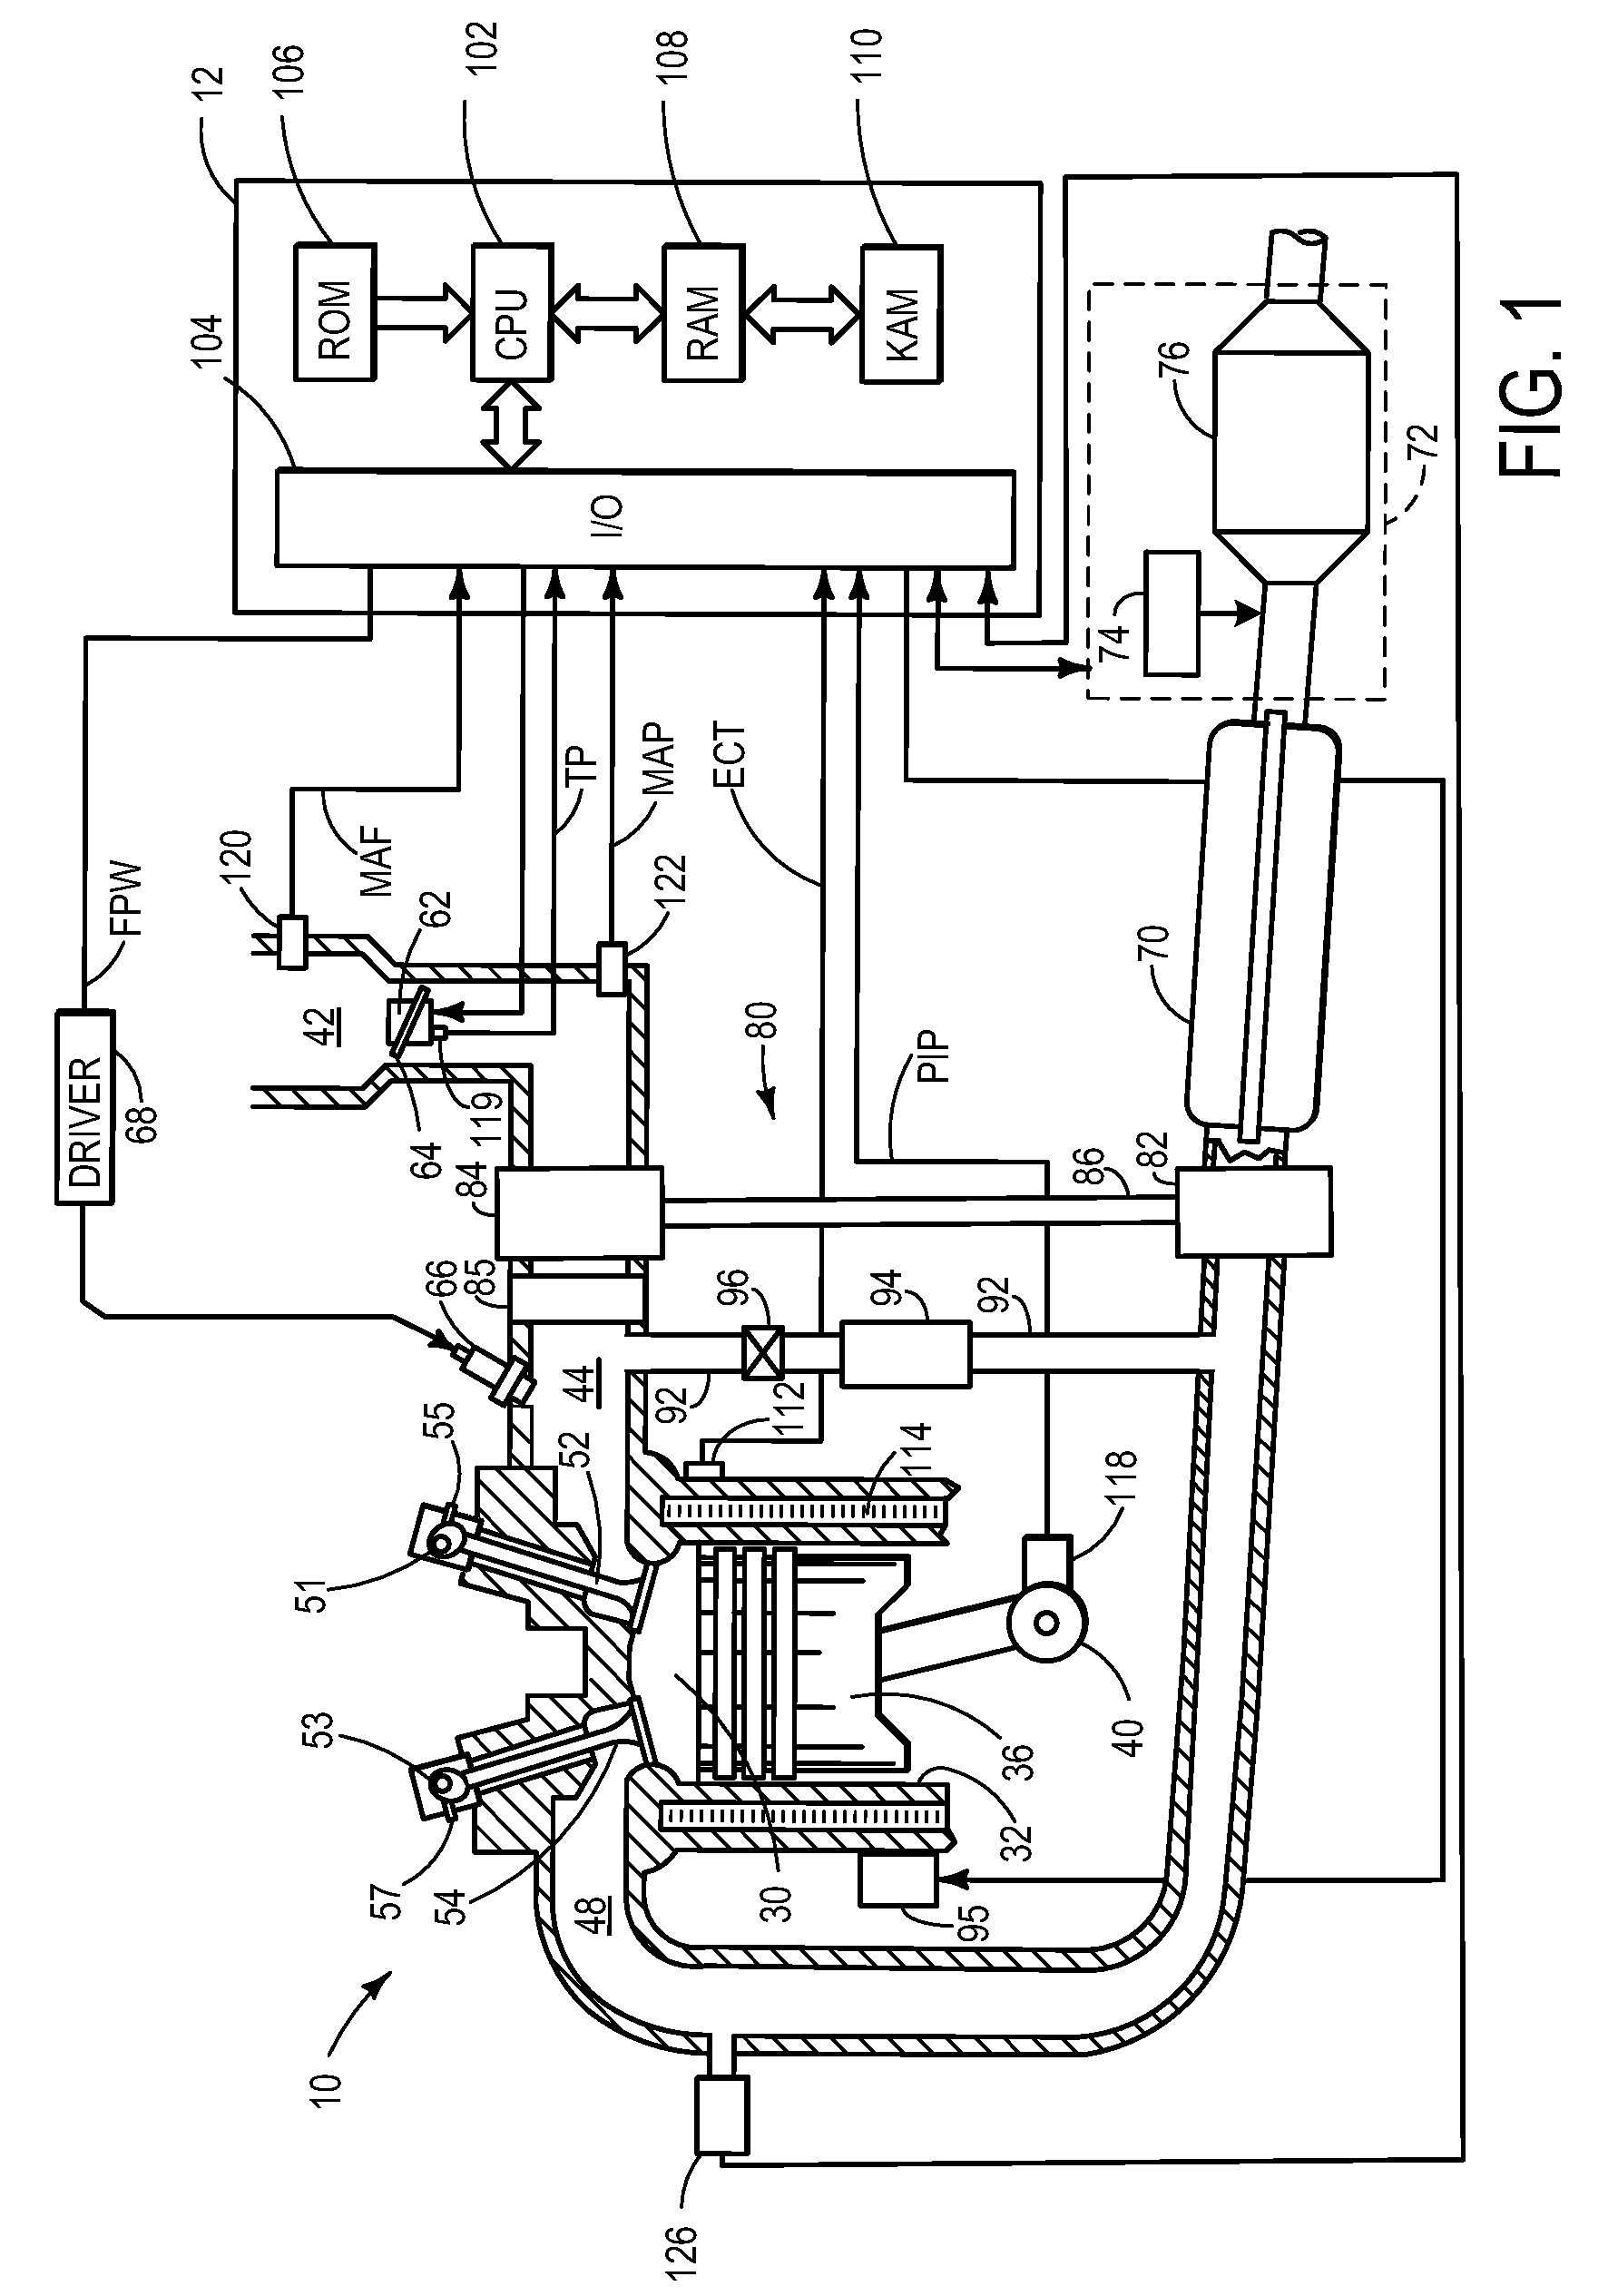 Managing reductant slip in an internal combustion engine